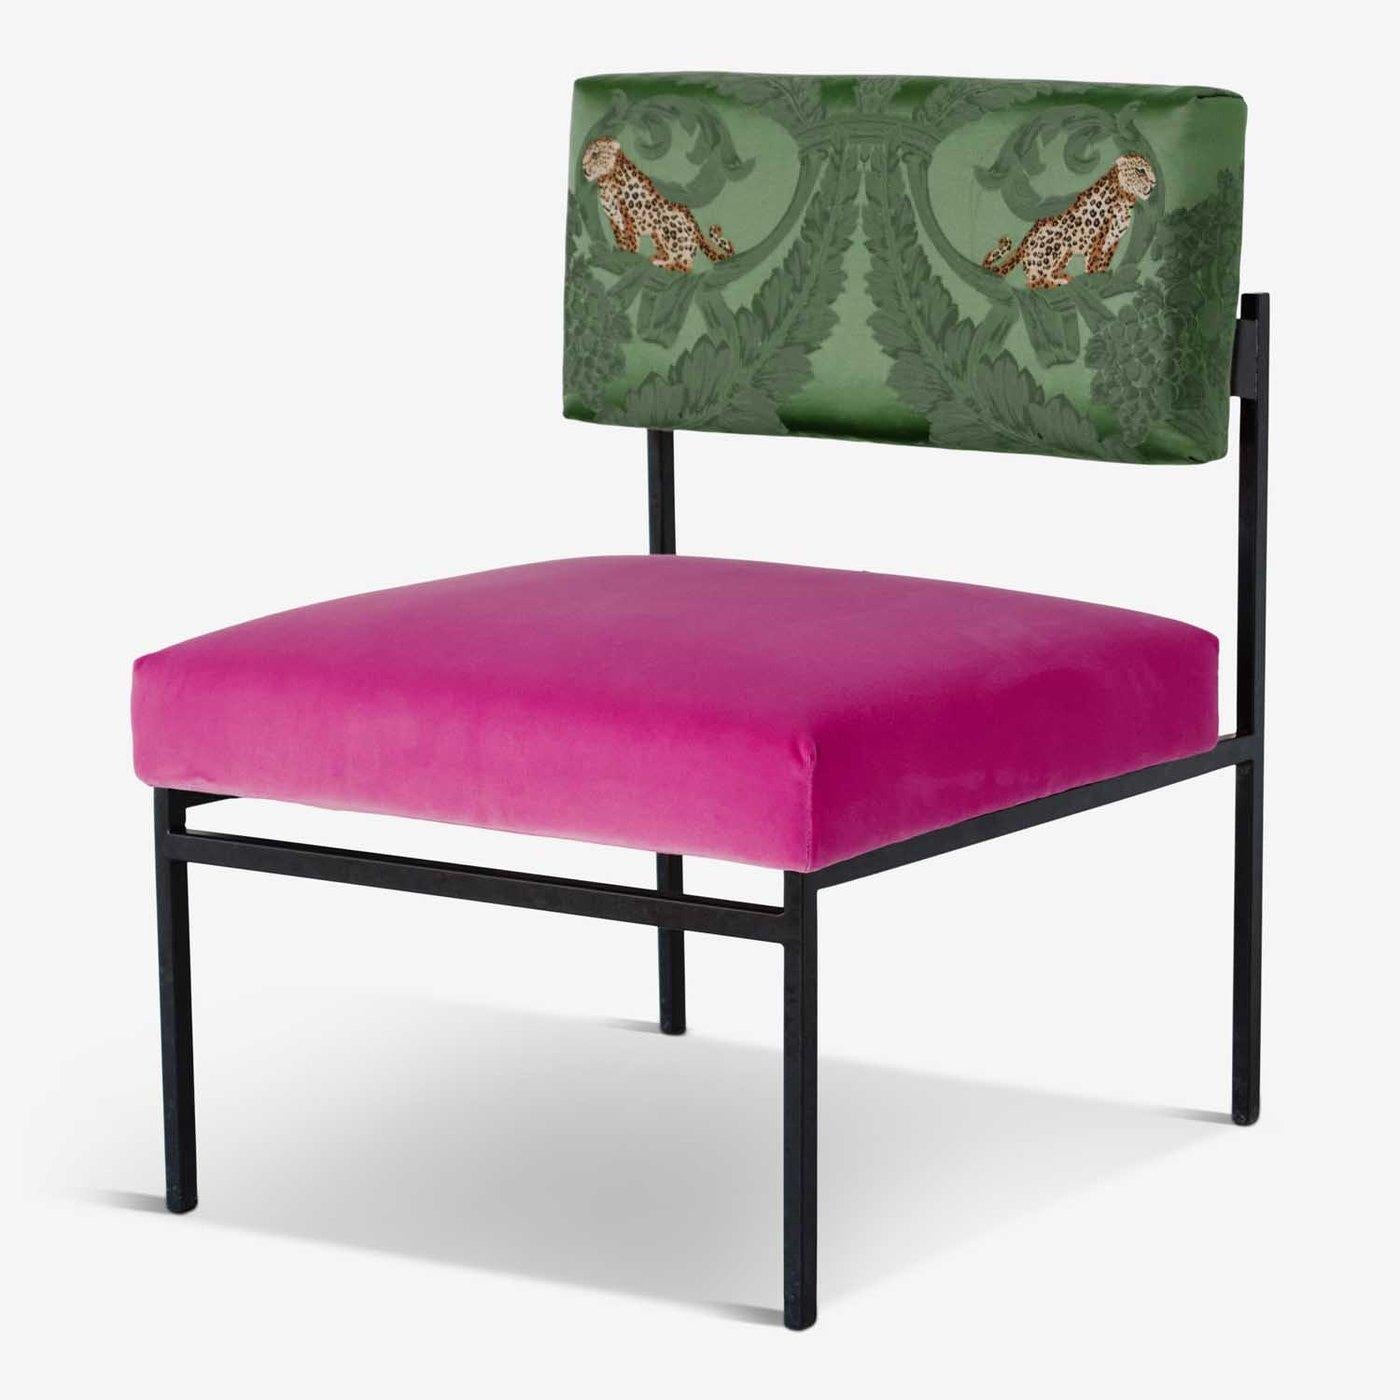 The Aurea Pink Velvet & Jungle Silk Armchair, by CtrlZak and Davide Barzaghi, is designed with bold lines and an ultra chic appearance. With its 50s retro appeal, this top selling item to restaurants and hotels is the ultimate in comfort and it’s